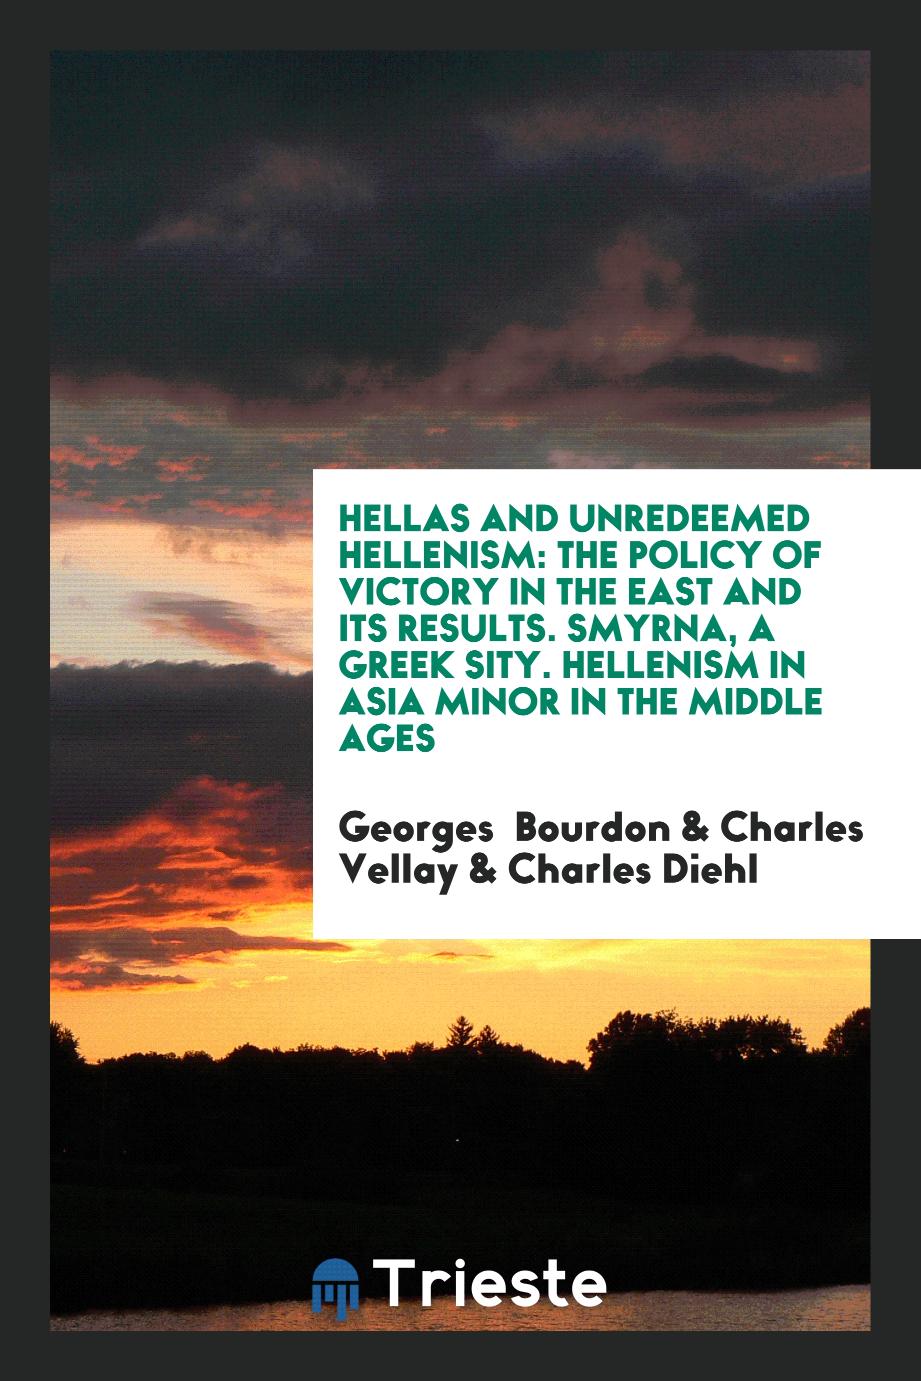 Hellas and unredeemed Hellenism: The policy of victory in the East and its results. Smyrna, a Greek Sity. Hellenism in Asia Minor in the middle ages